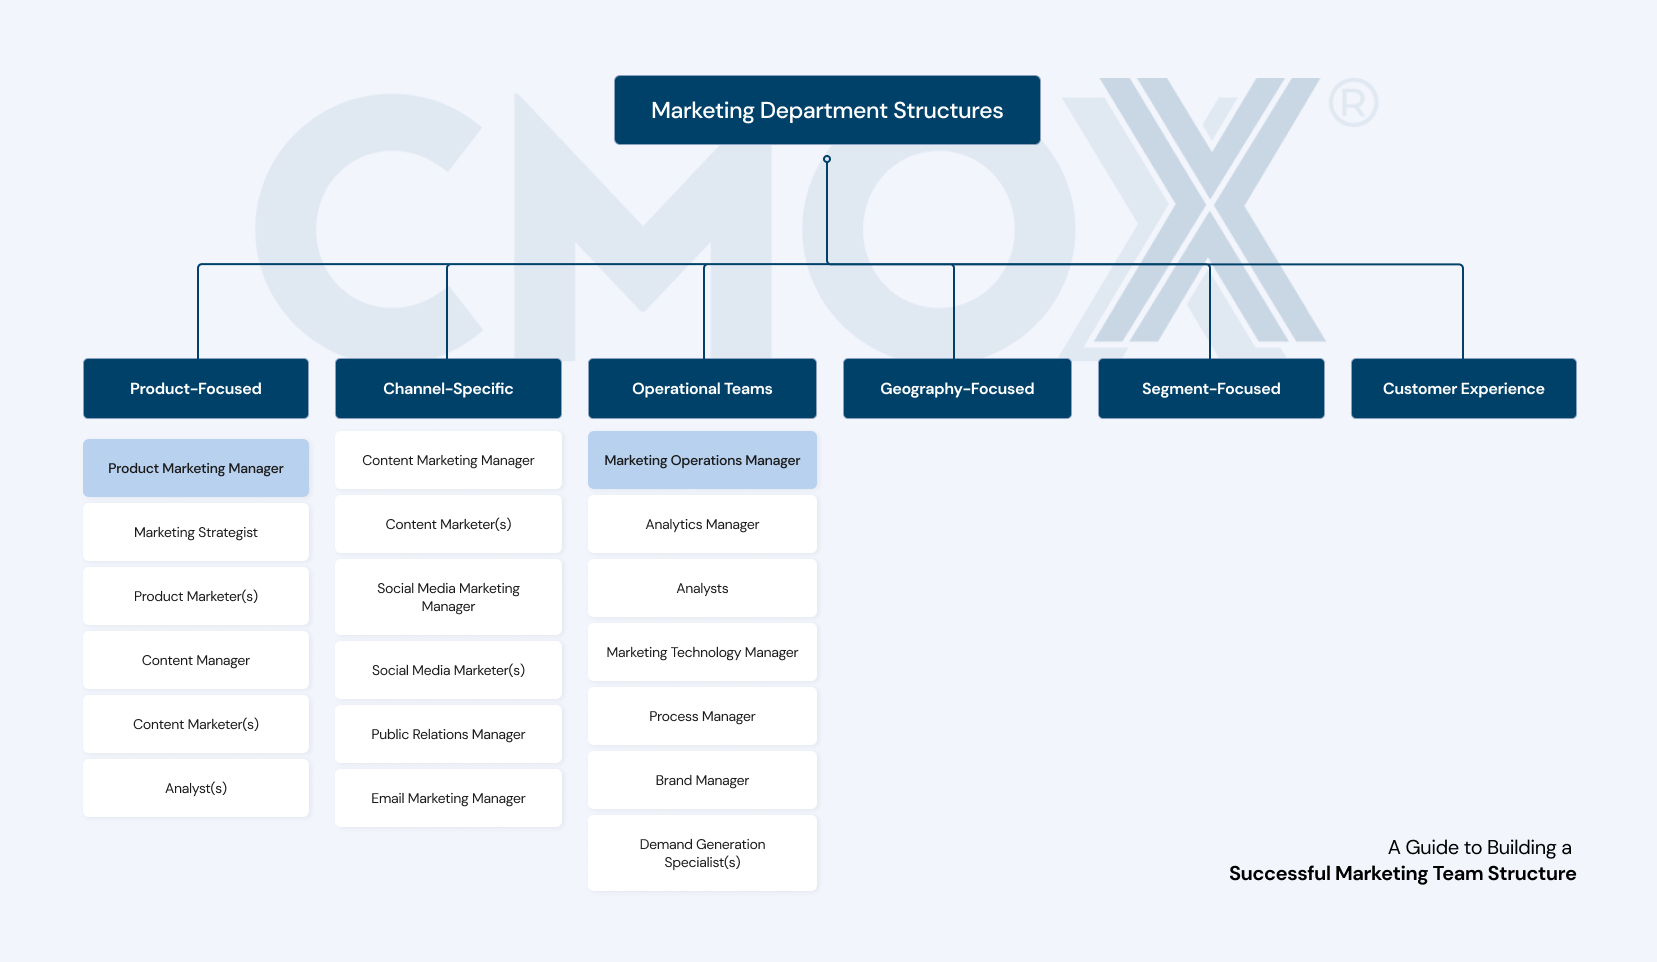 Marketing Department Structures